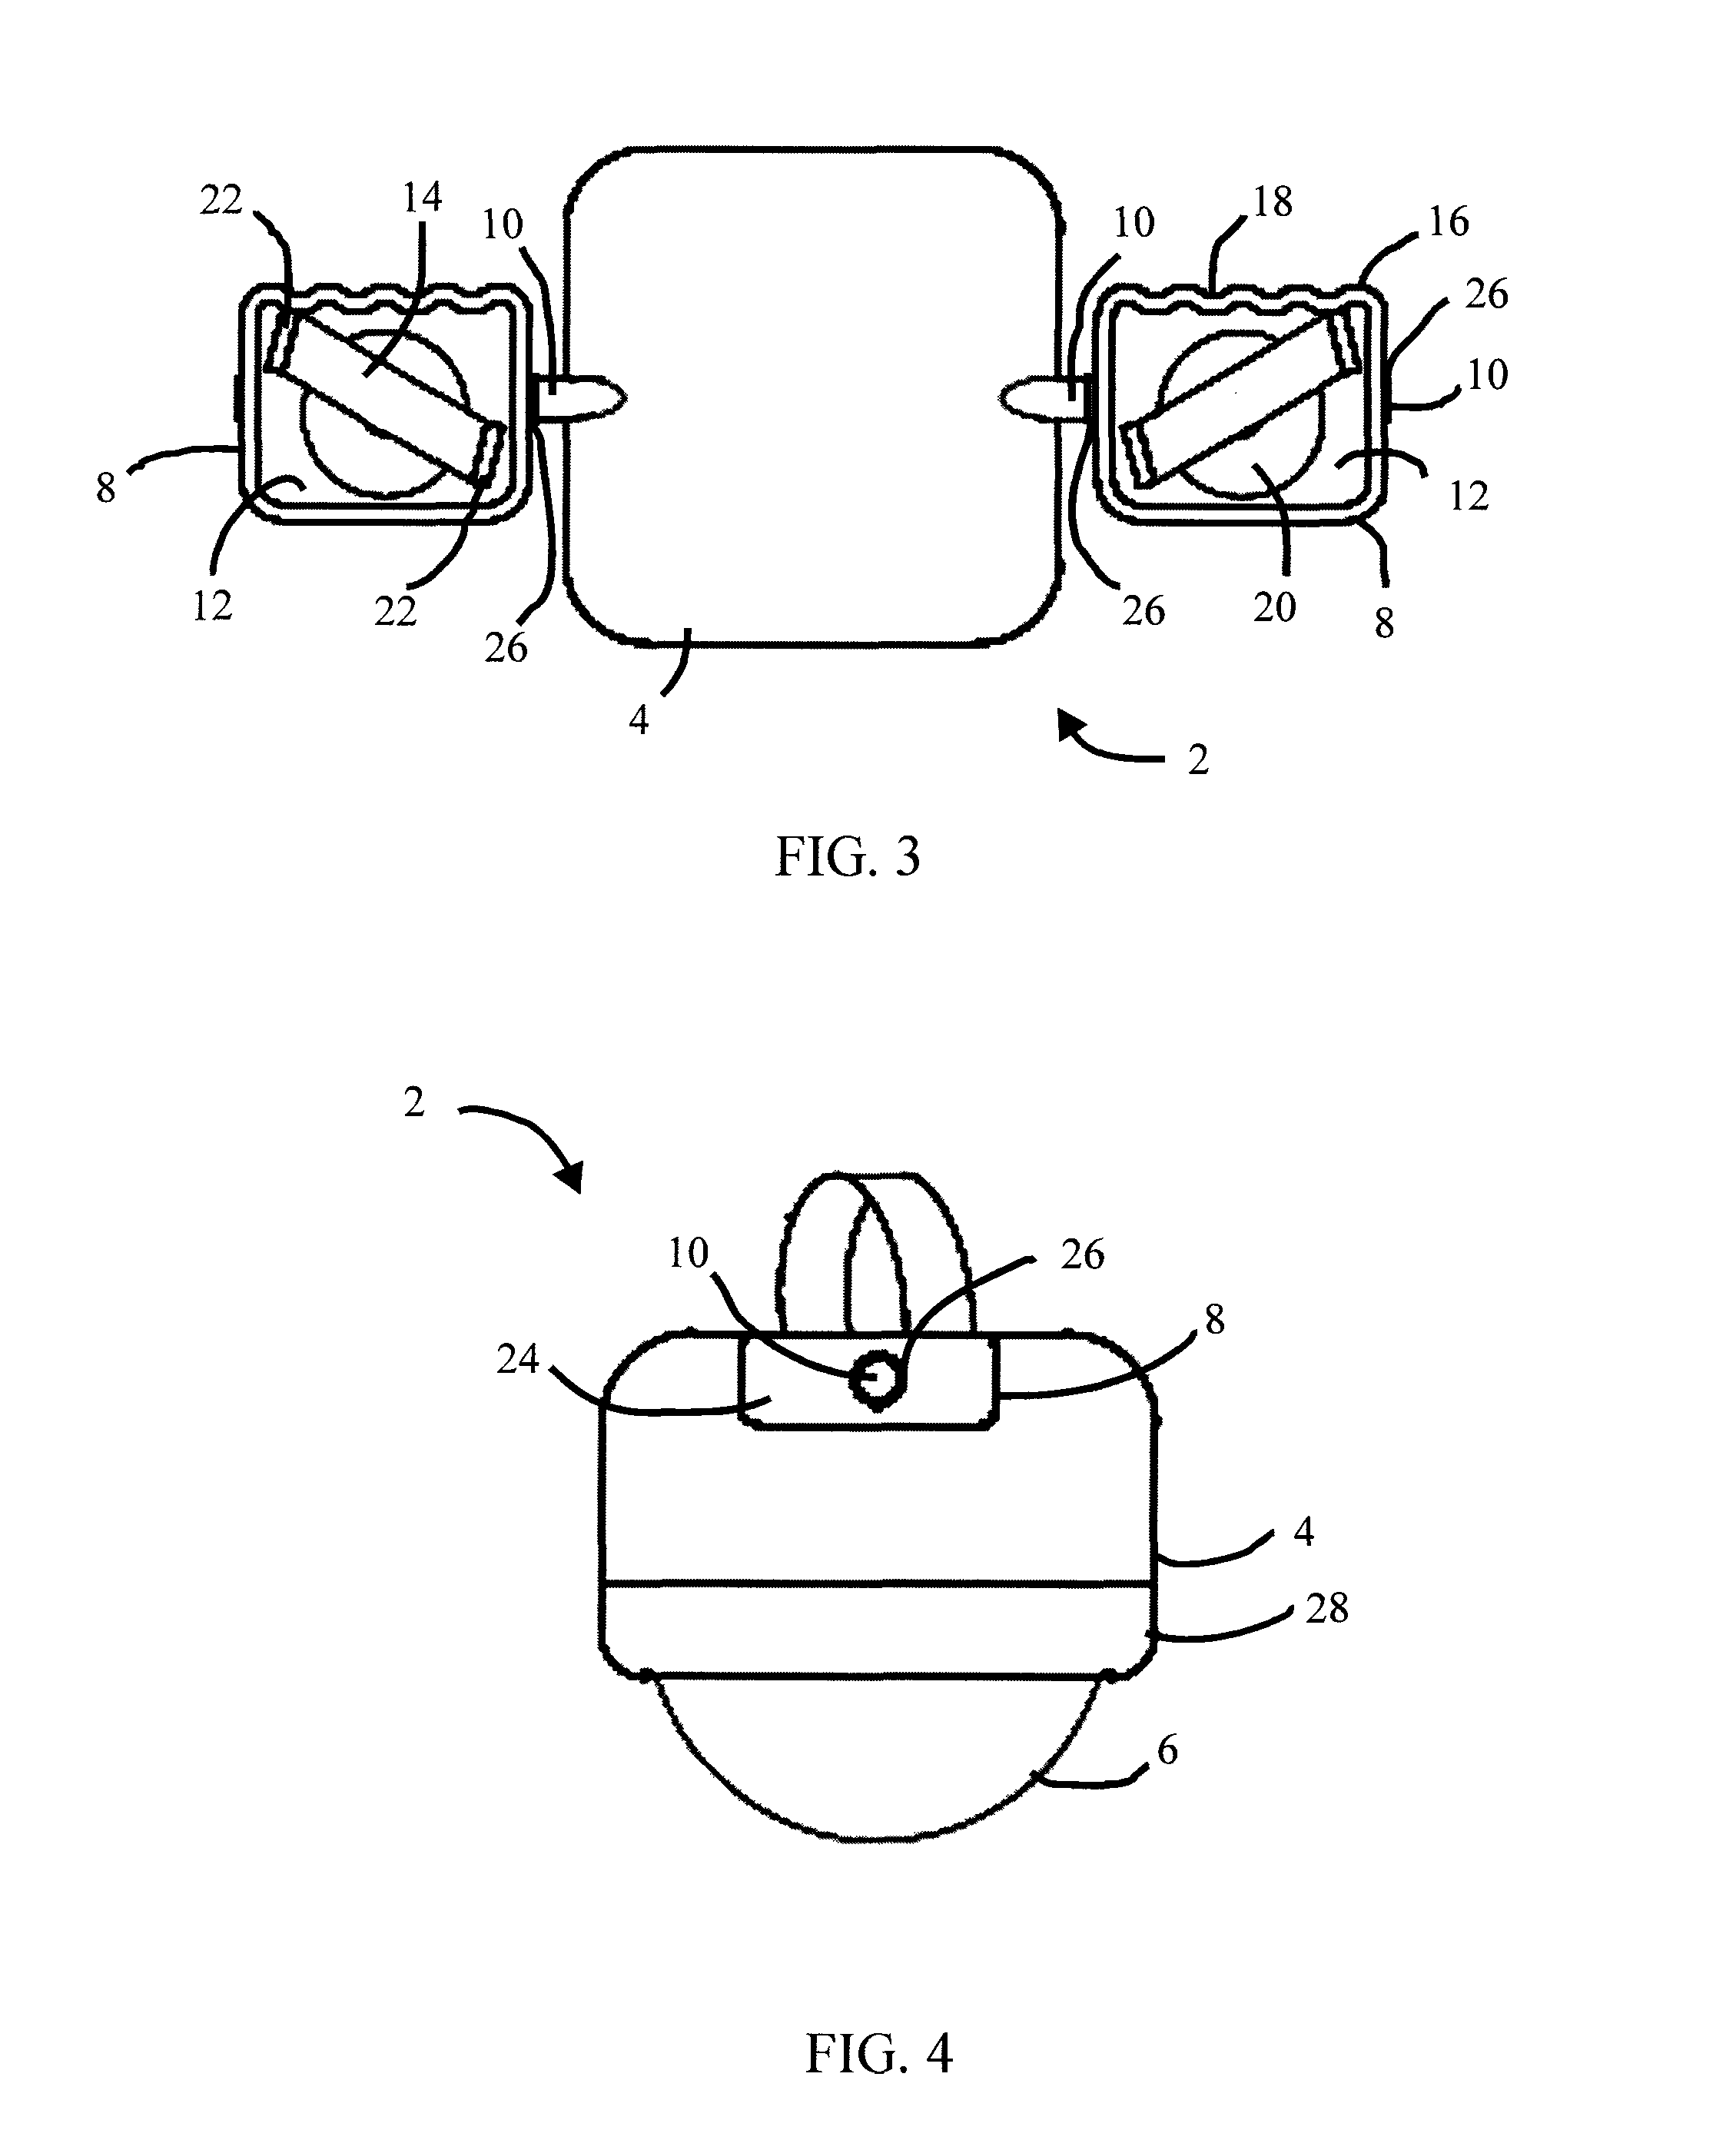 Multi-directional rolling abdominal exercise device